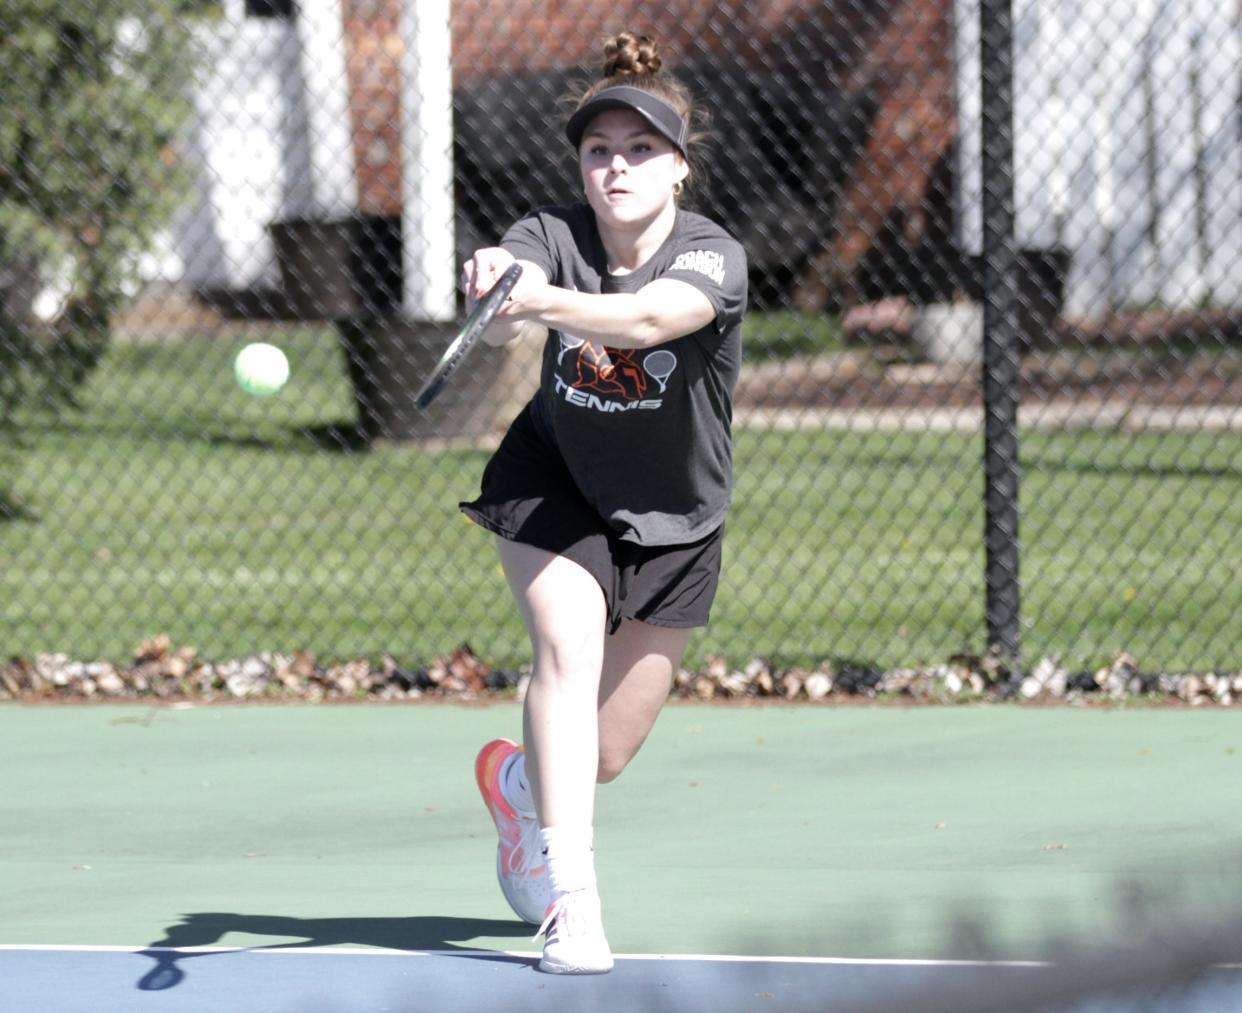 Gracie Perry of Sturgis hits a return in one of her matches on Saturday.